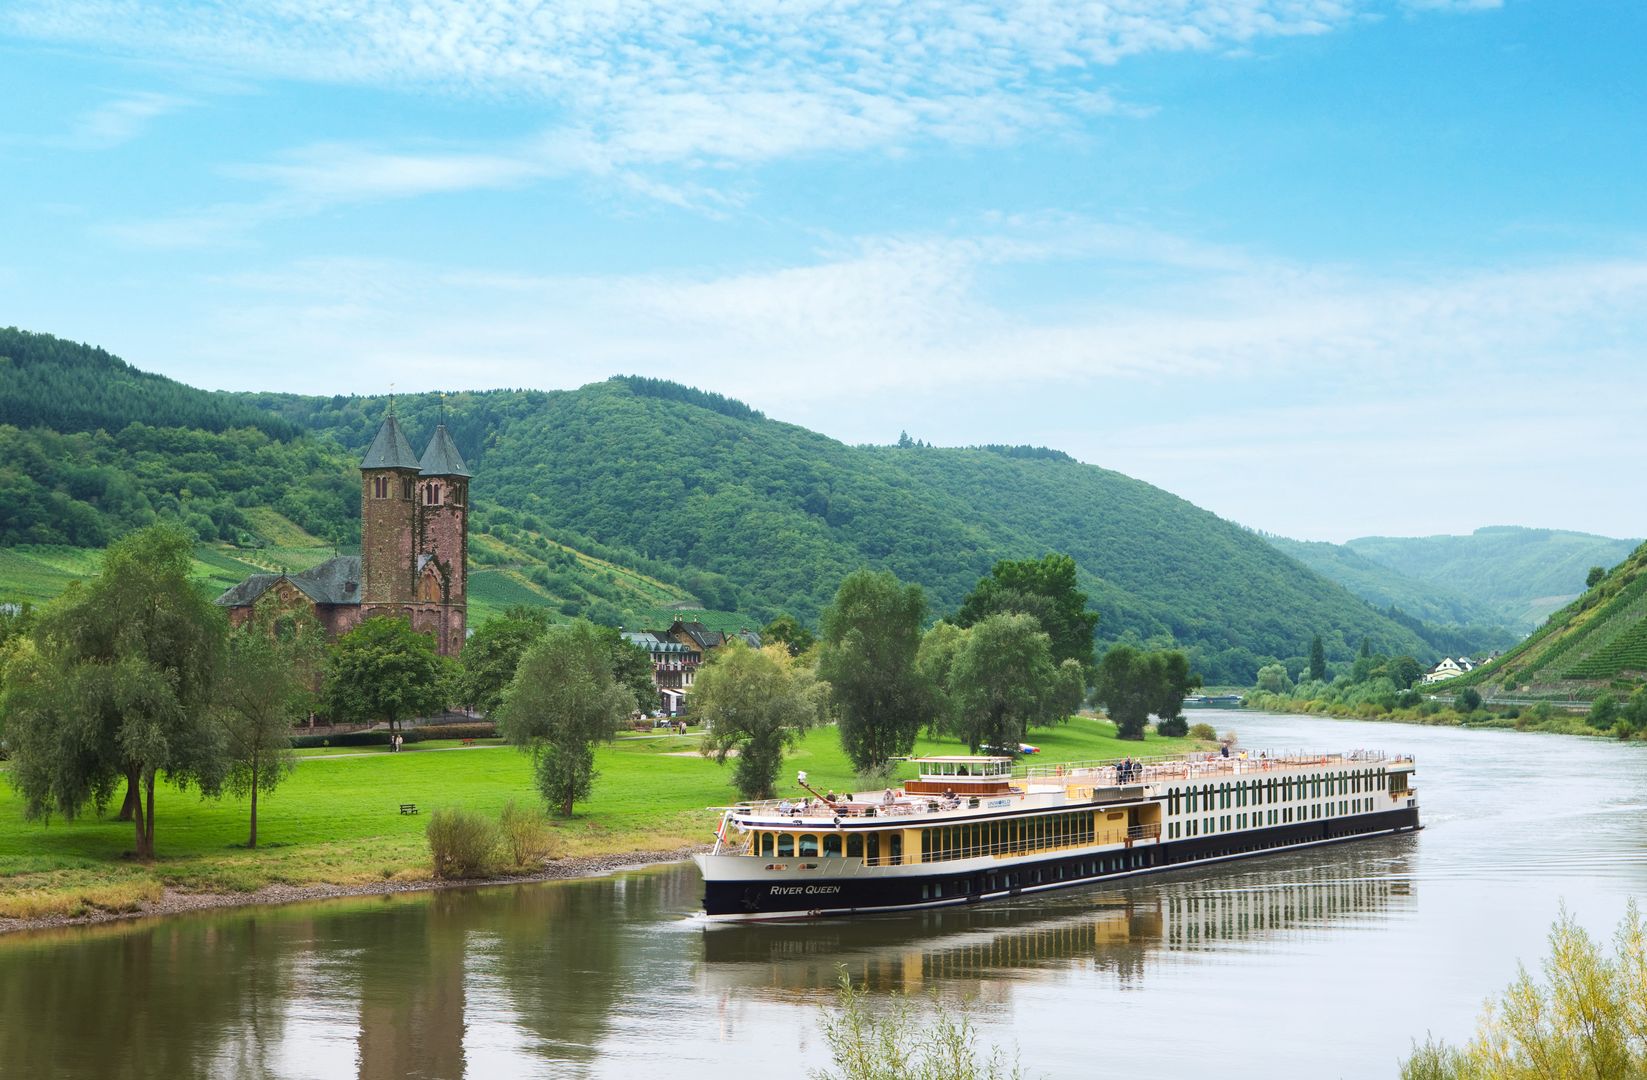 Exterior view of River Queen sailing on the Moselle